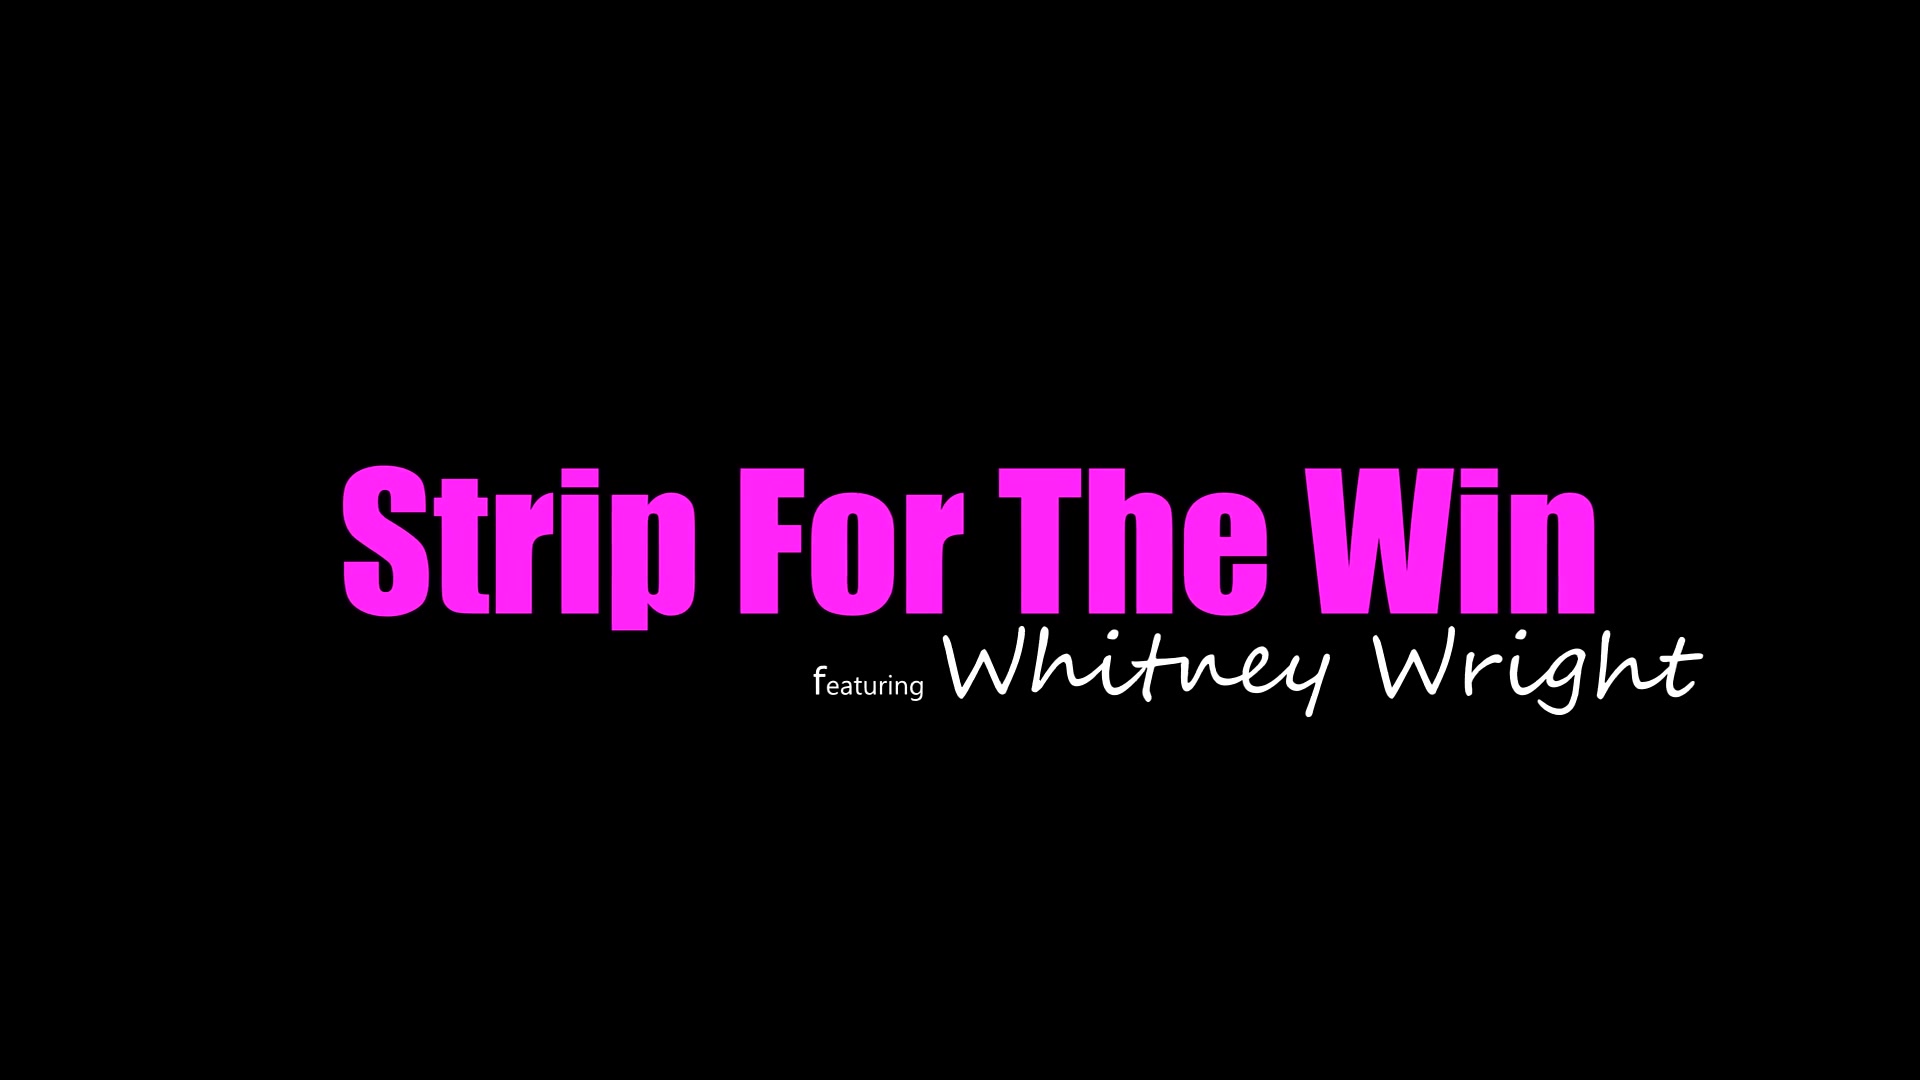 Whitney Wright - Strip for the win